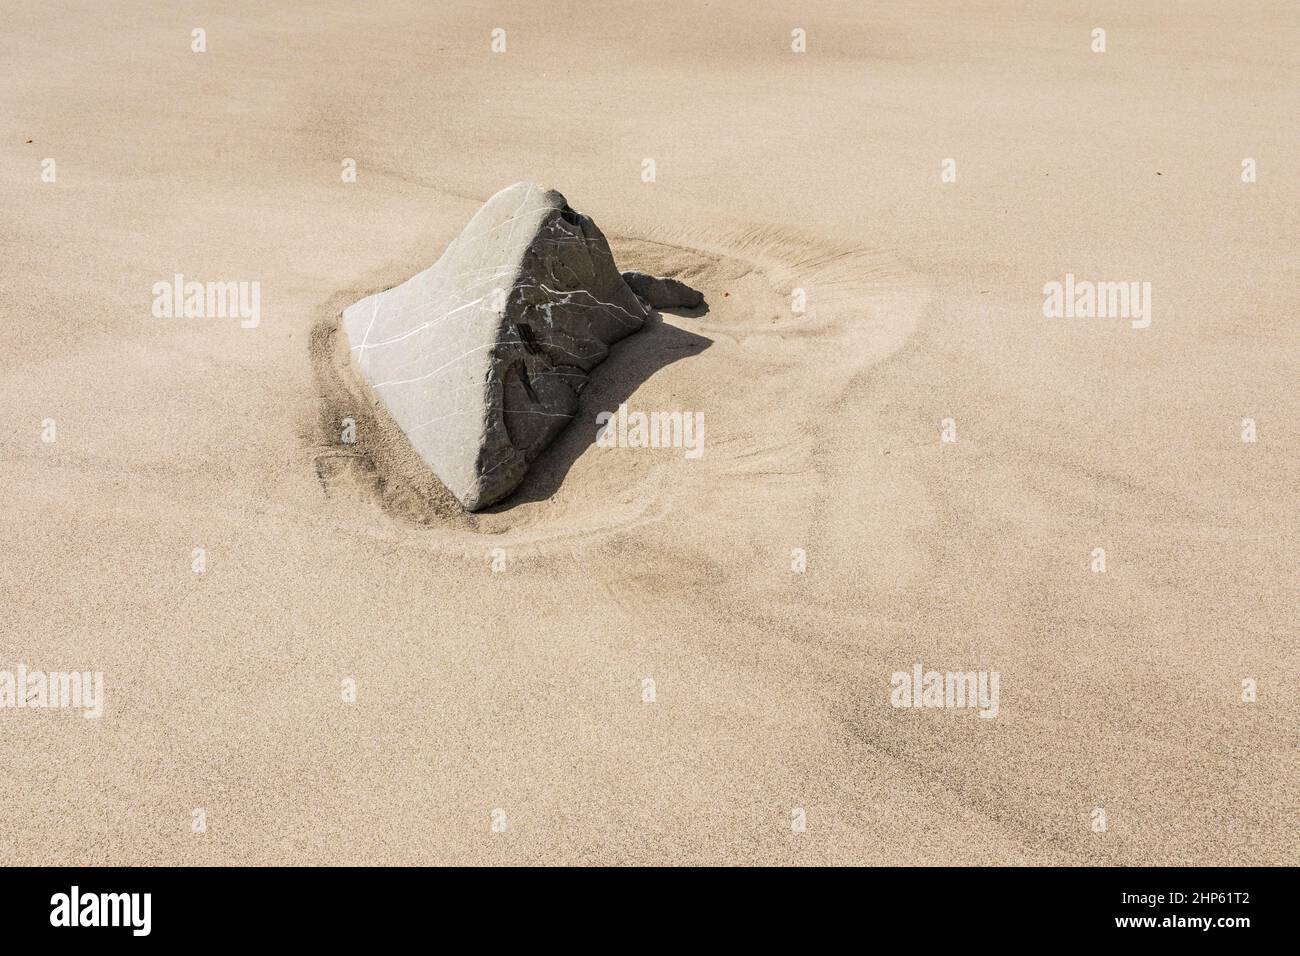 A rock exposed above a sandy beach after tides have receded. Stock Photo